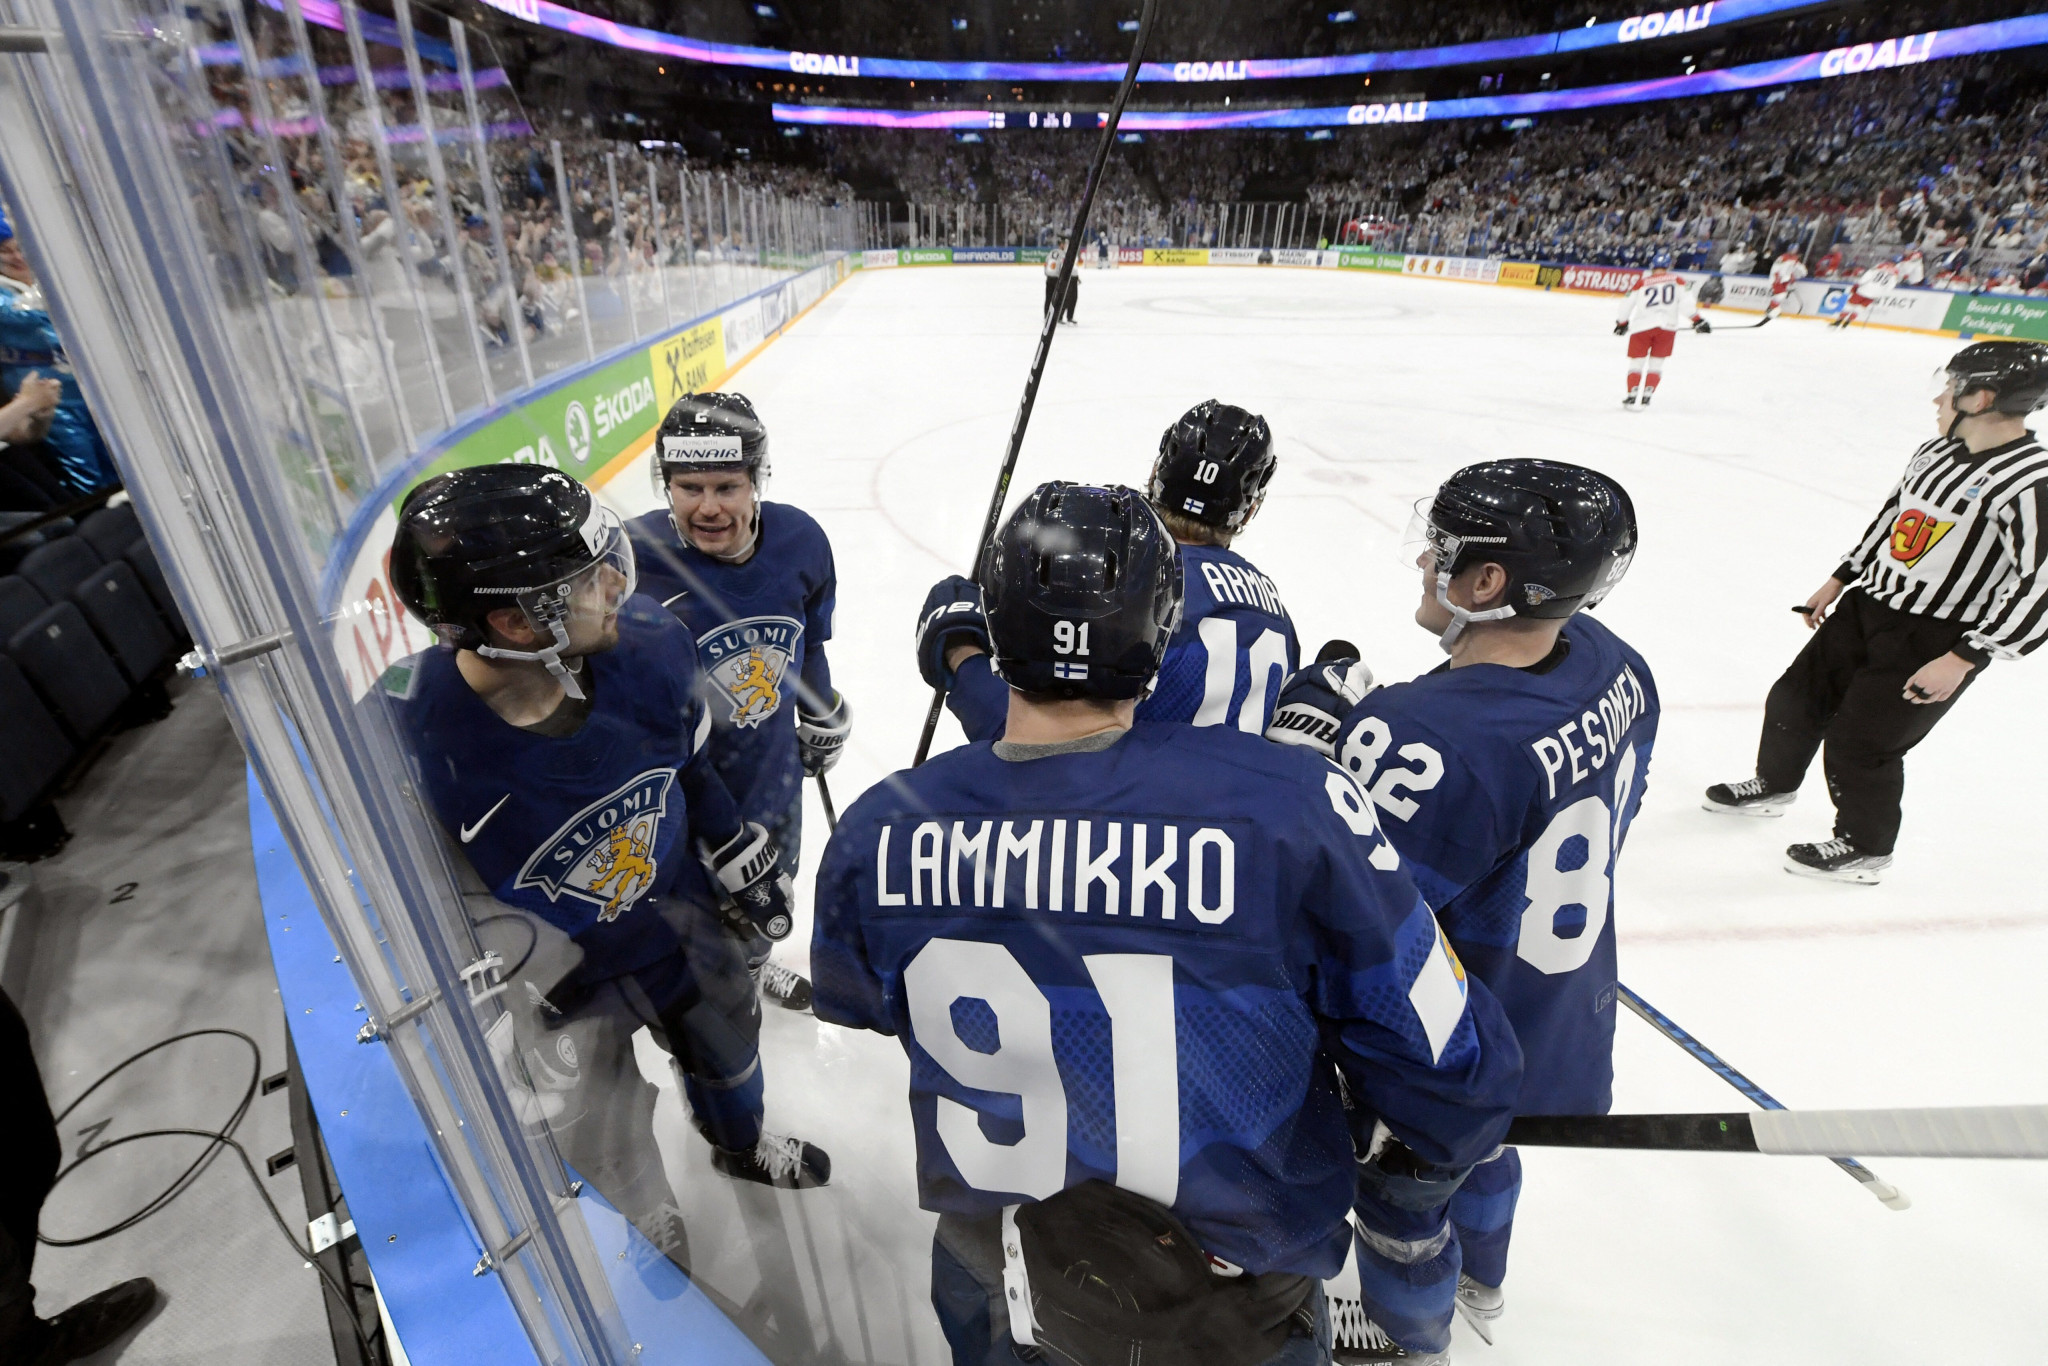 IIHF 'Ice Hockey World Championship' 2023: Finland beats Germany 4-3 in  Tampere – All Things Nordic